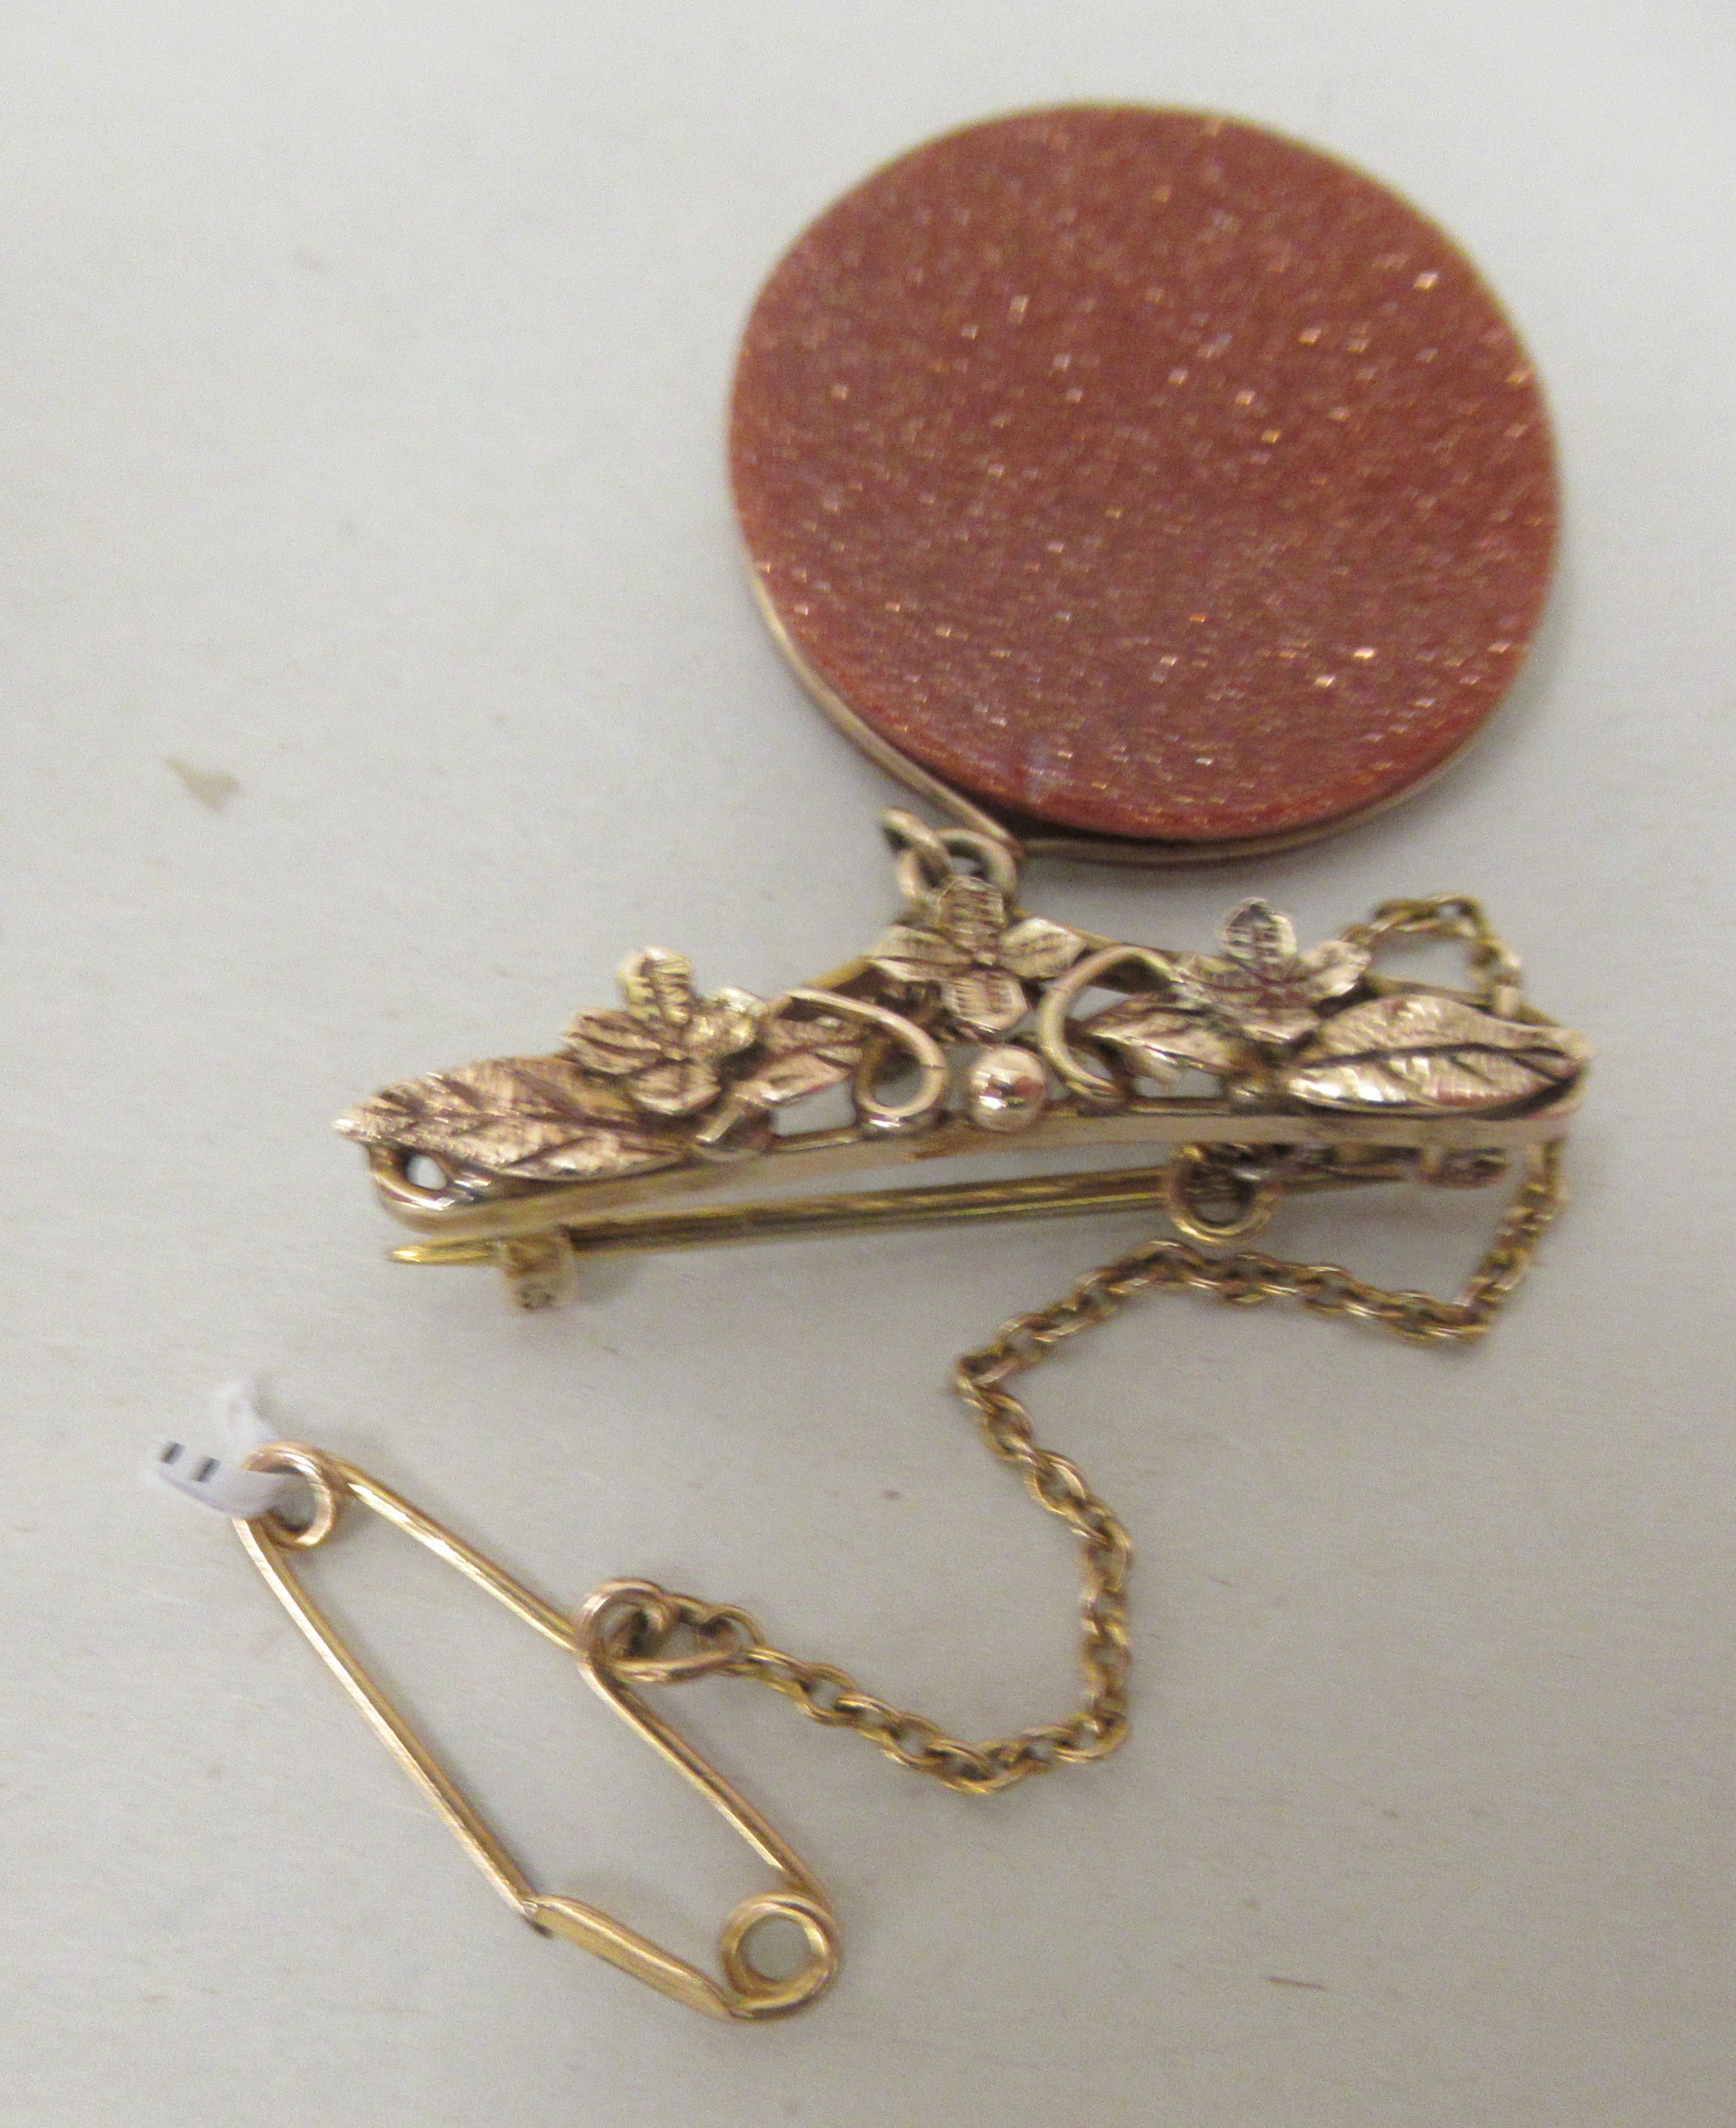 A yellow metal brooch with a gold stone pendant